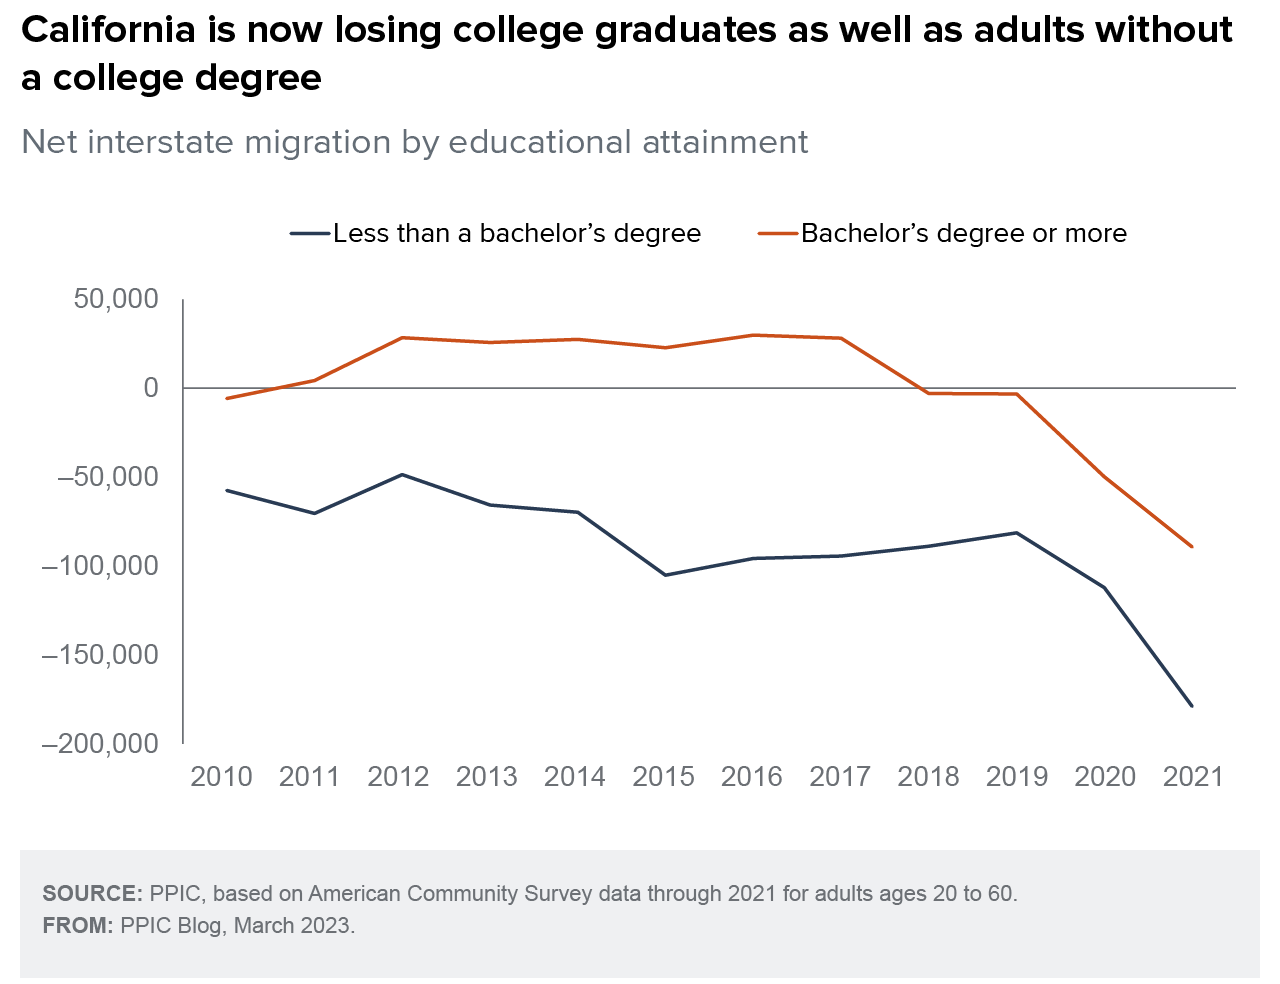 figure - California is now losing college graduates as well as adults without a college degree